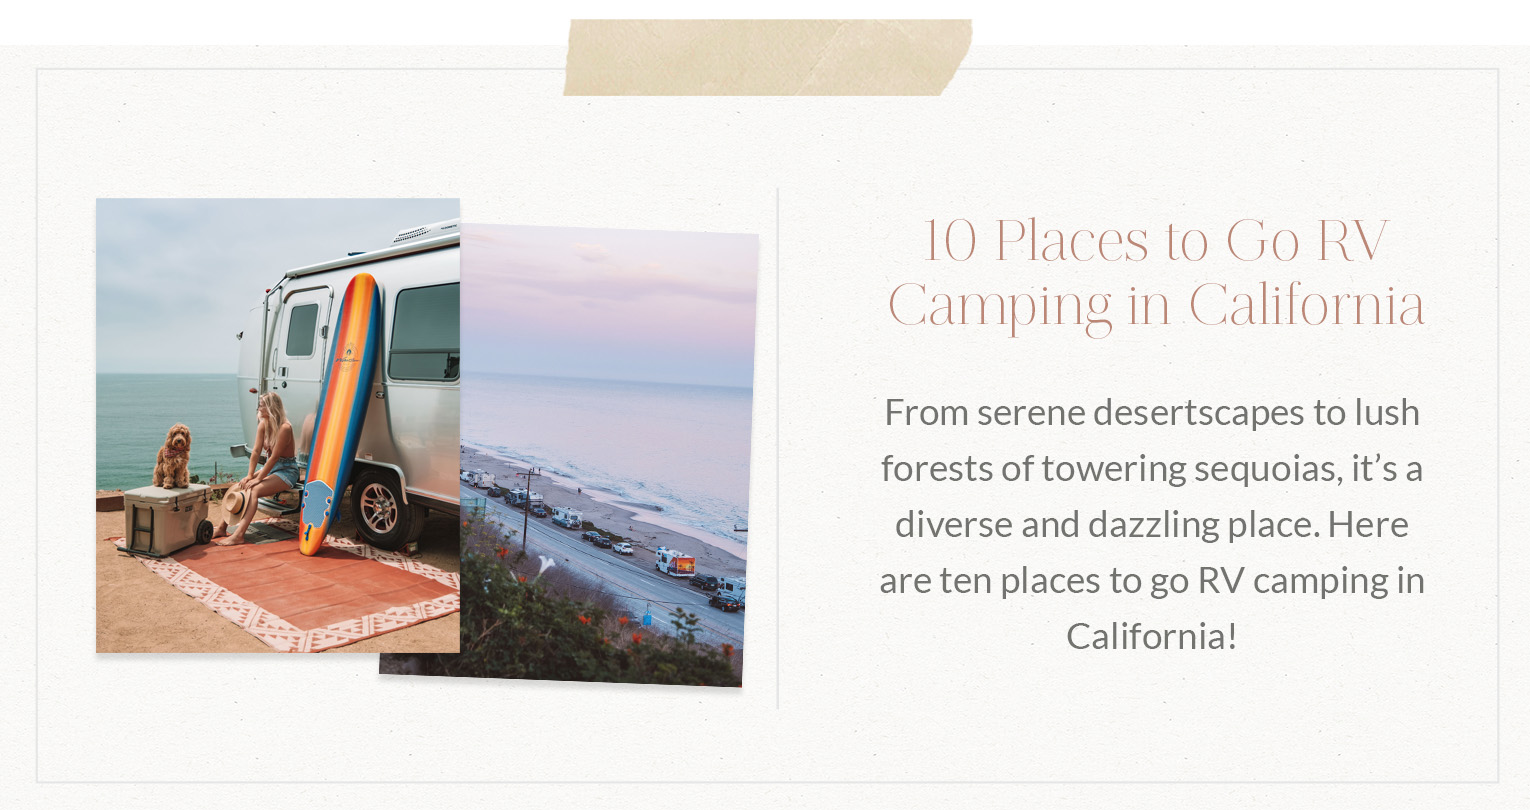 https://www.theblondeabroad.com/10-places-to-go-rv-camping-in-california/